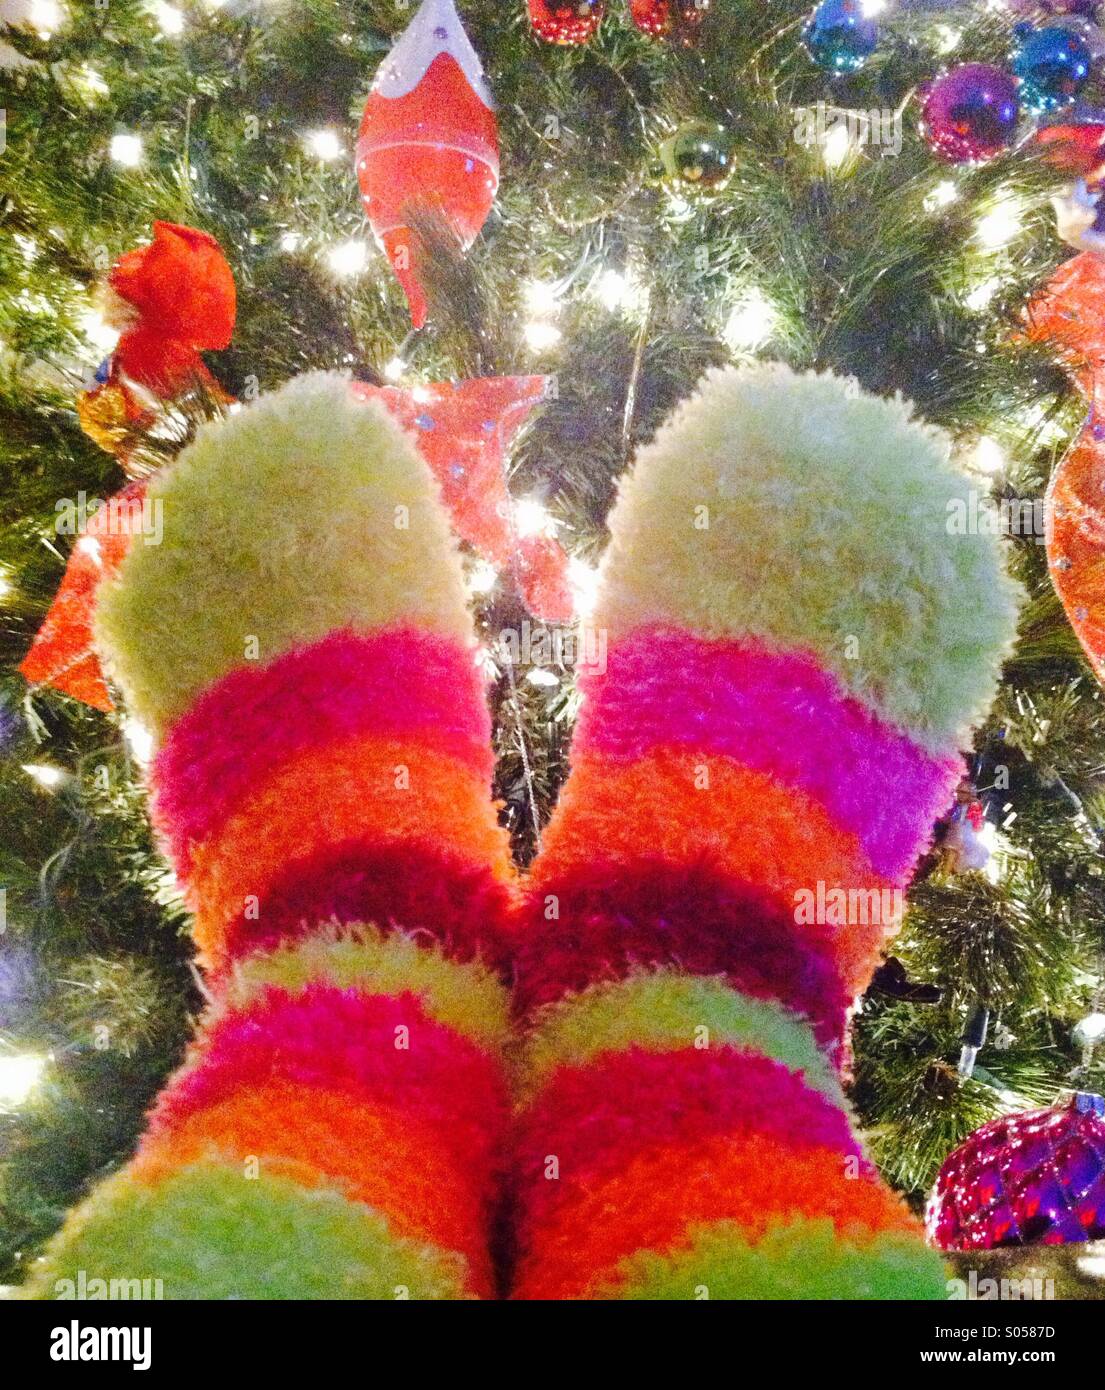 https://c8.alamy.com/comp/S0587D/fuzzy-socks!-i-took-this-photo-when-i-was-watching-tv-and-looked-at-S0587D.jpg